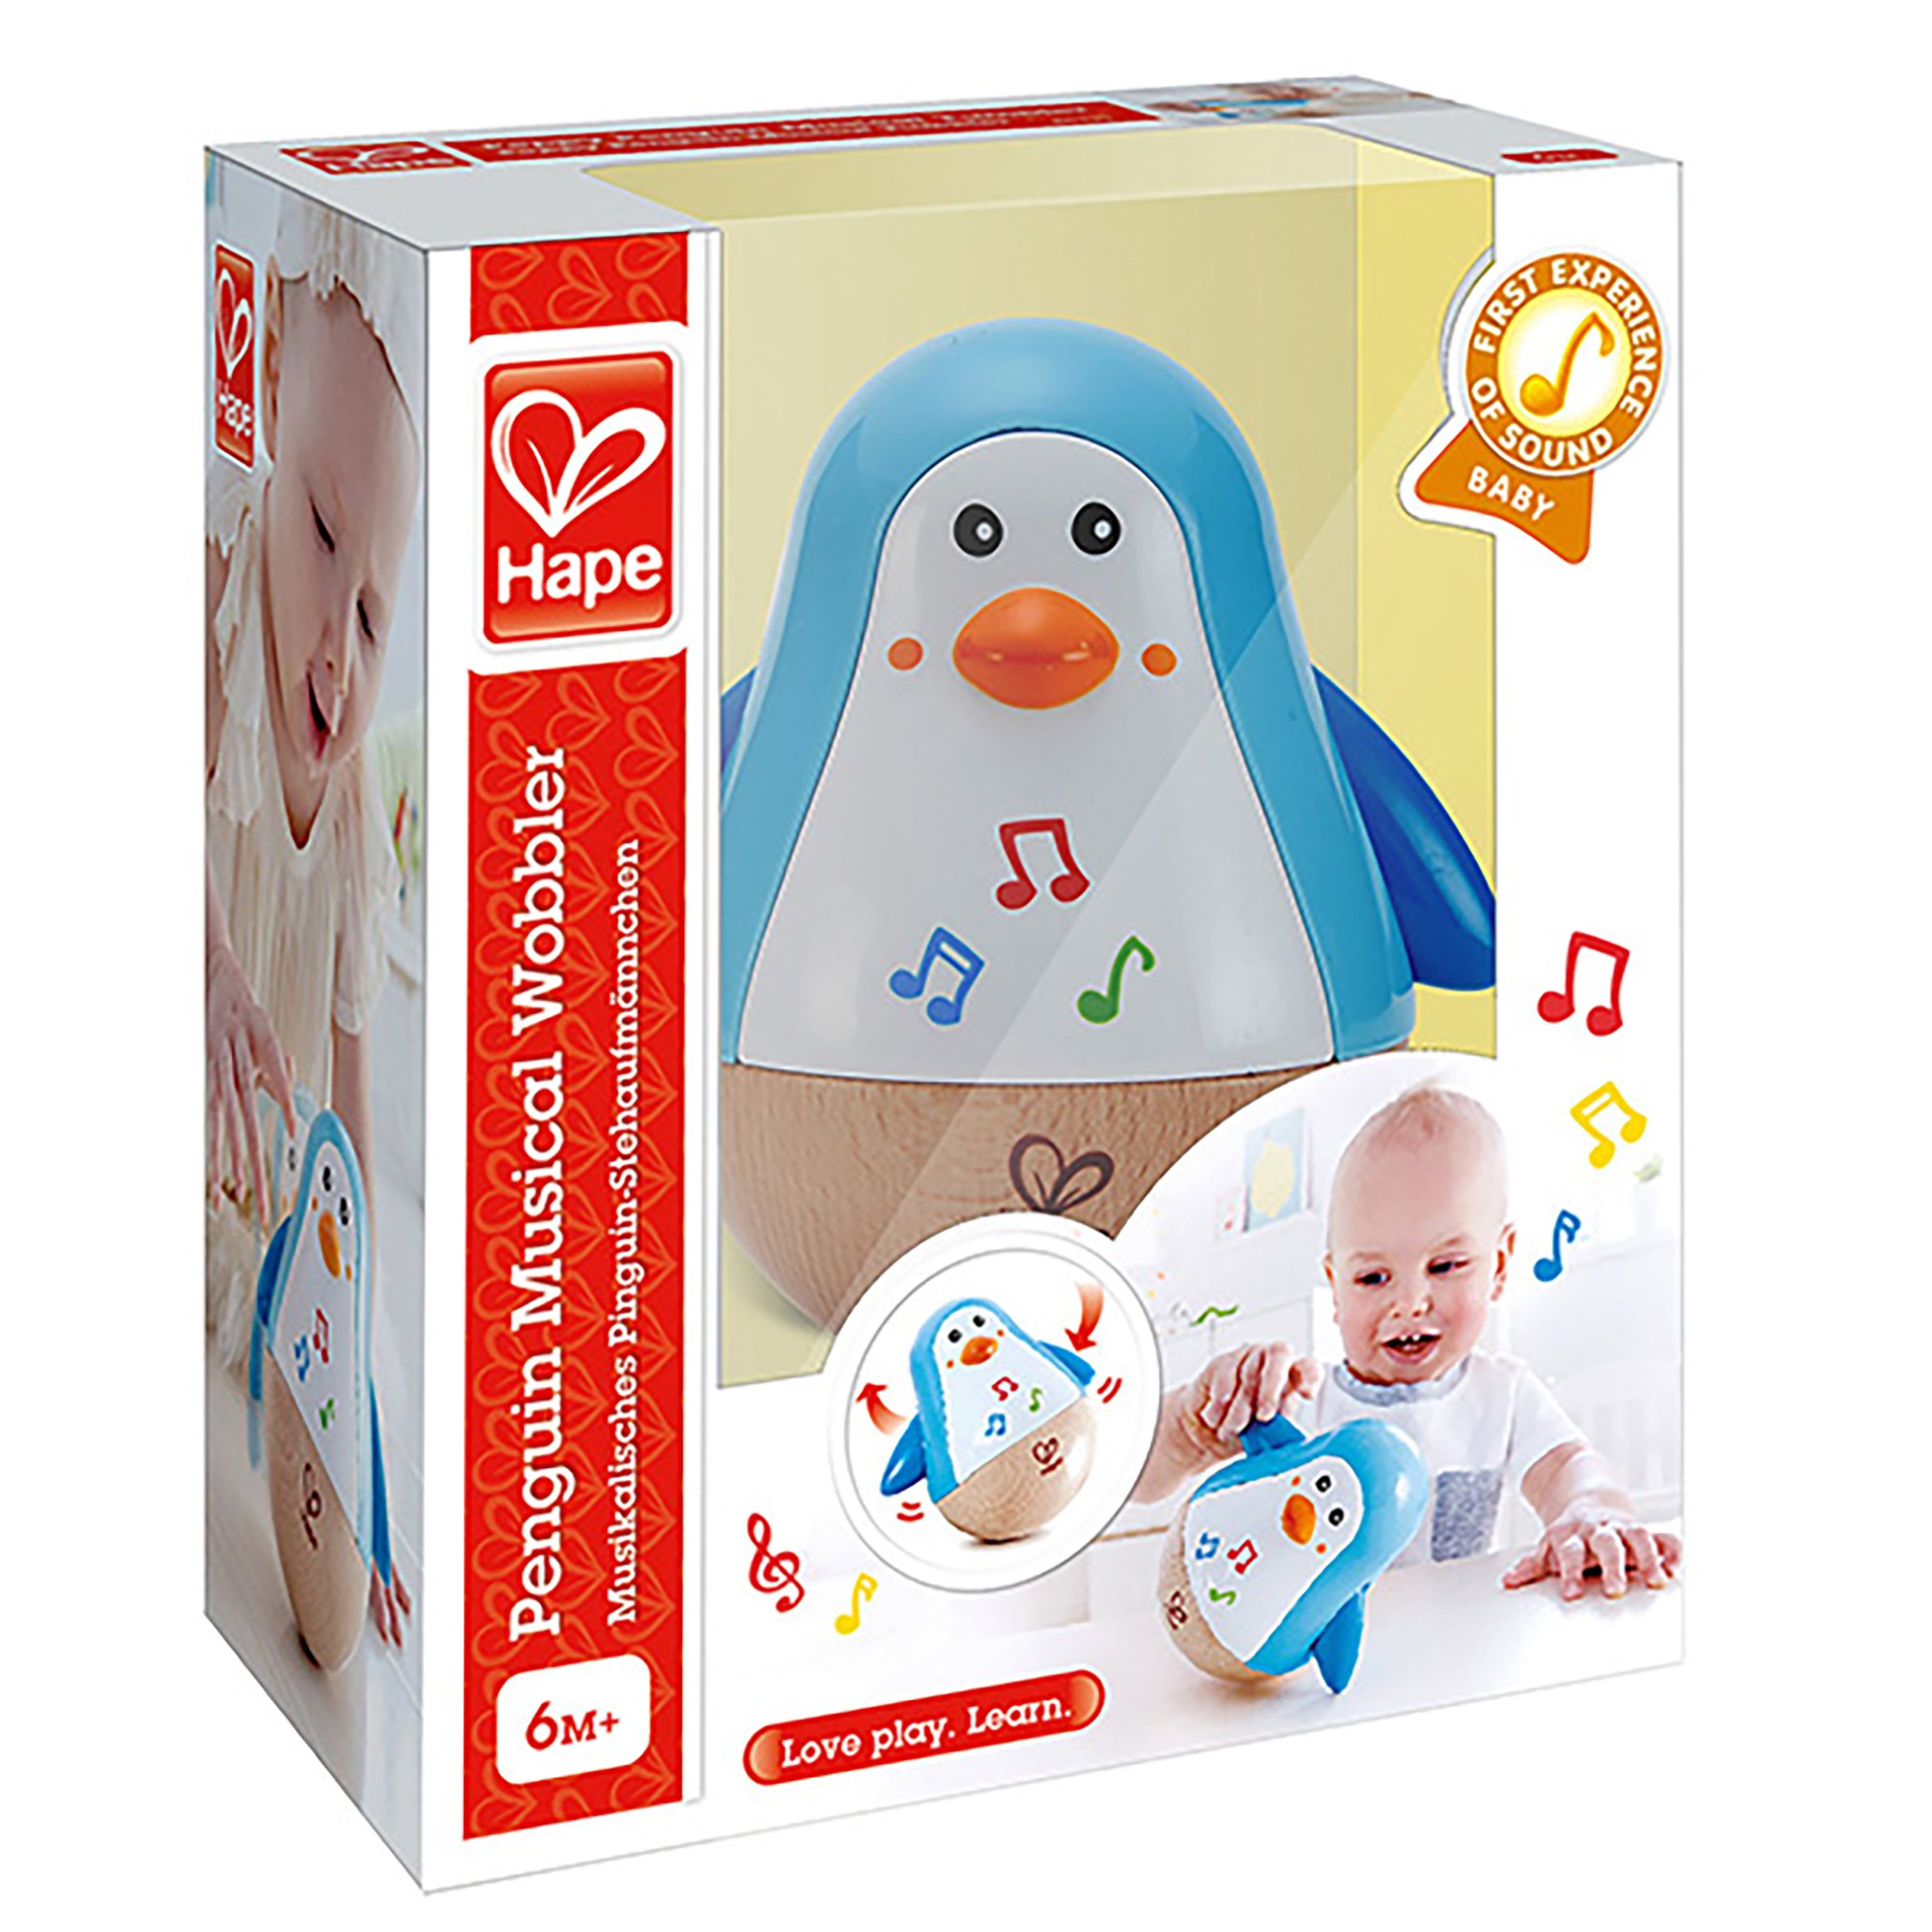 Hape: Penguin Musical Wobbler W/ Tinkling Sounds & Moving Arms As It Waddles - image 2 of 7